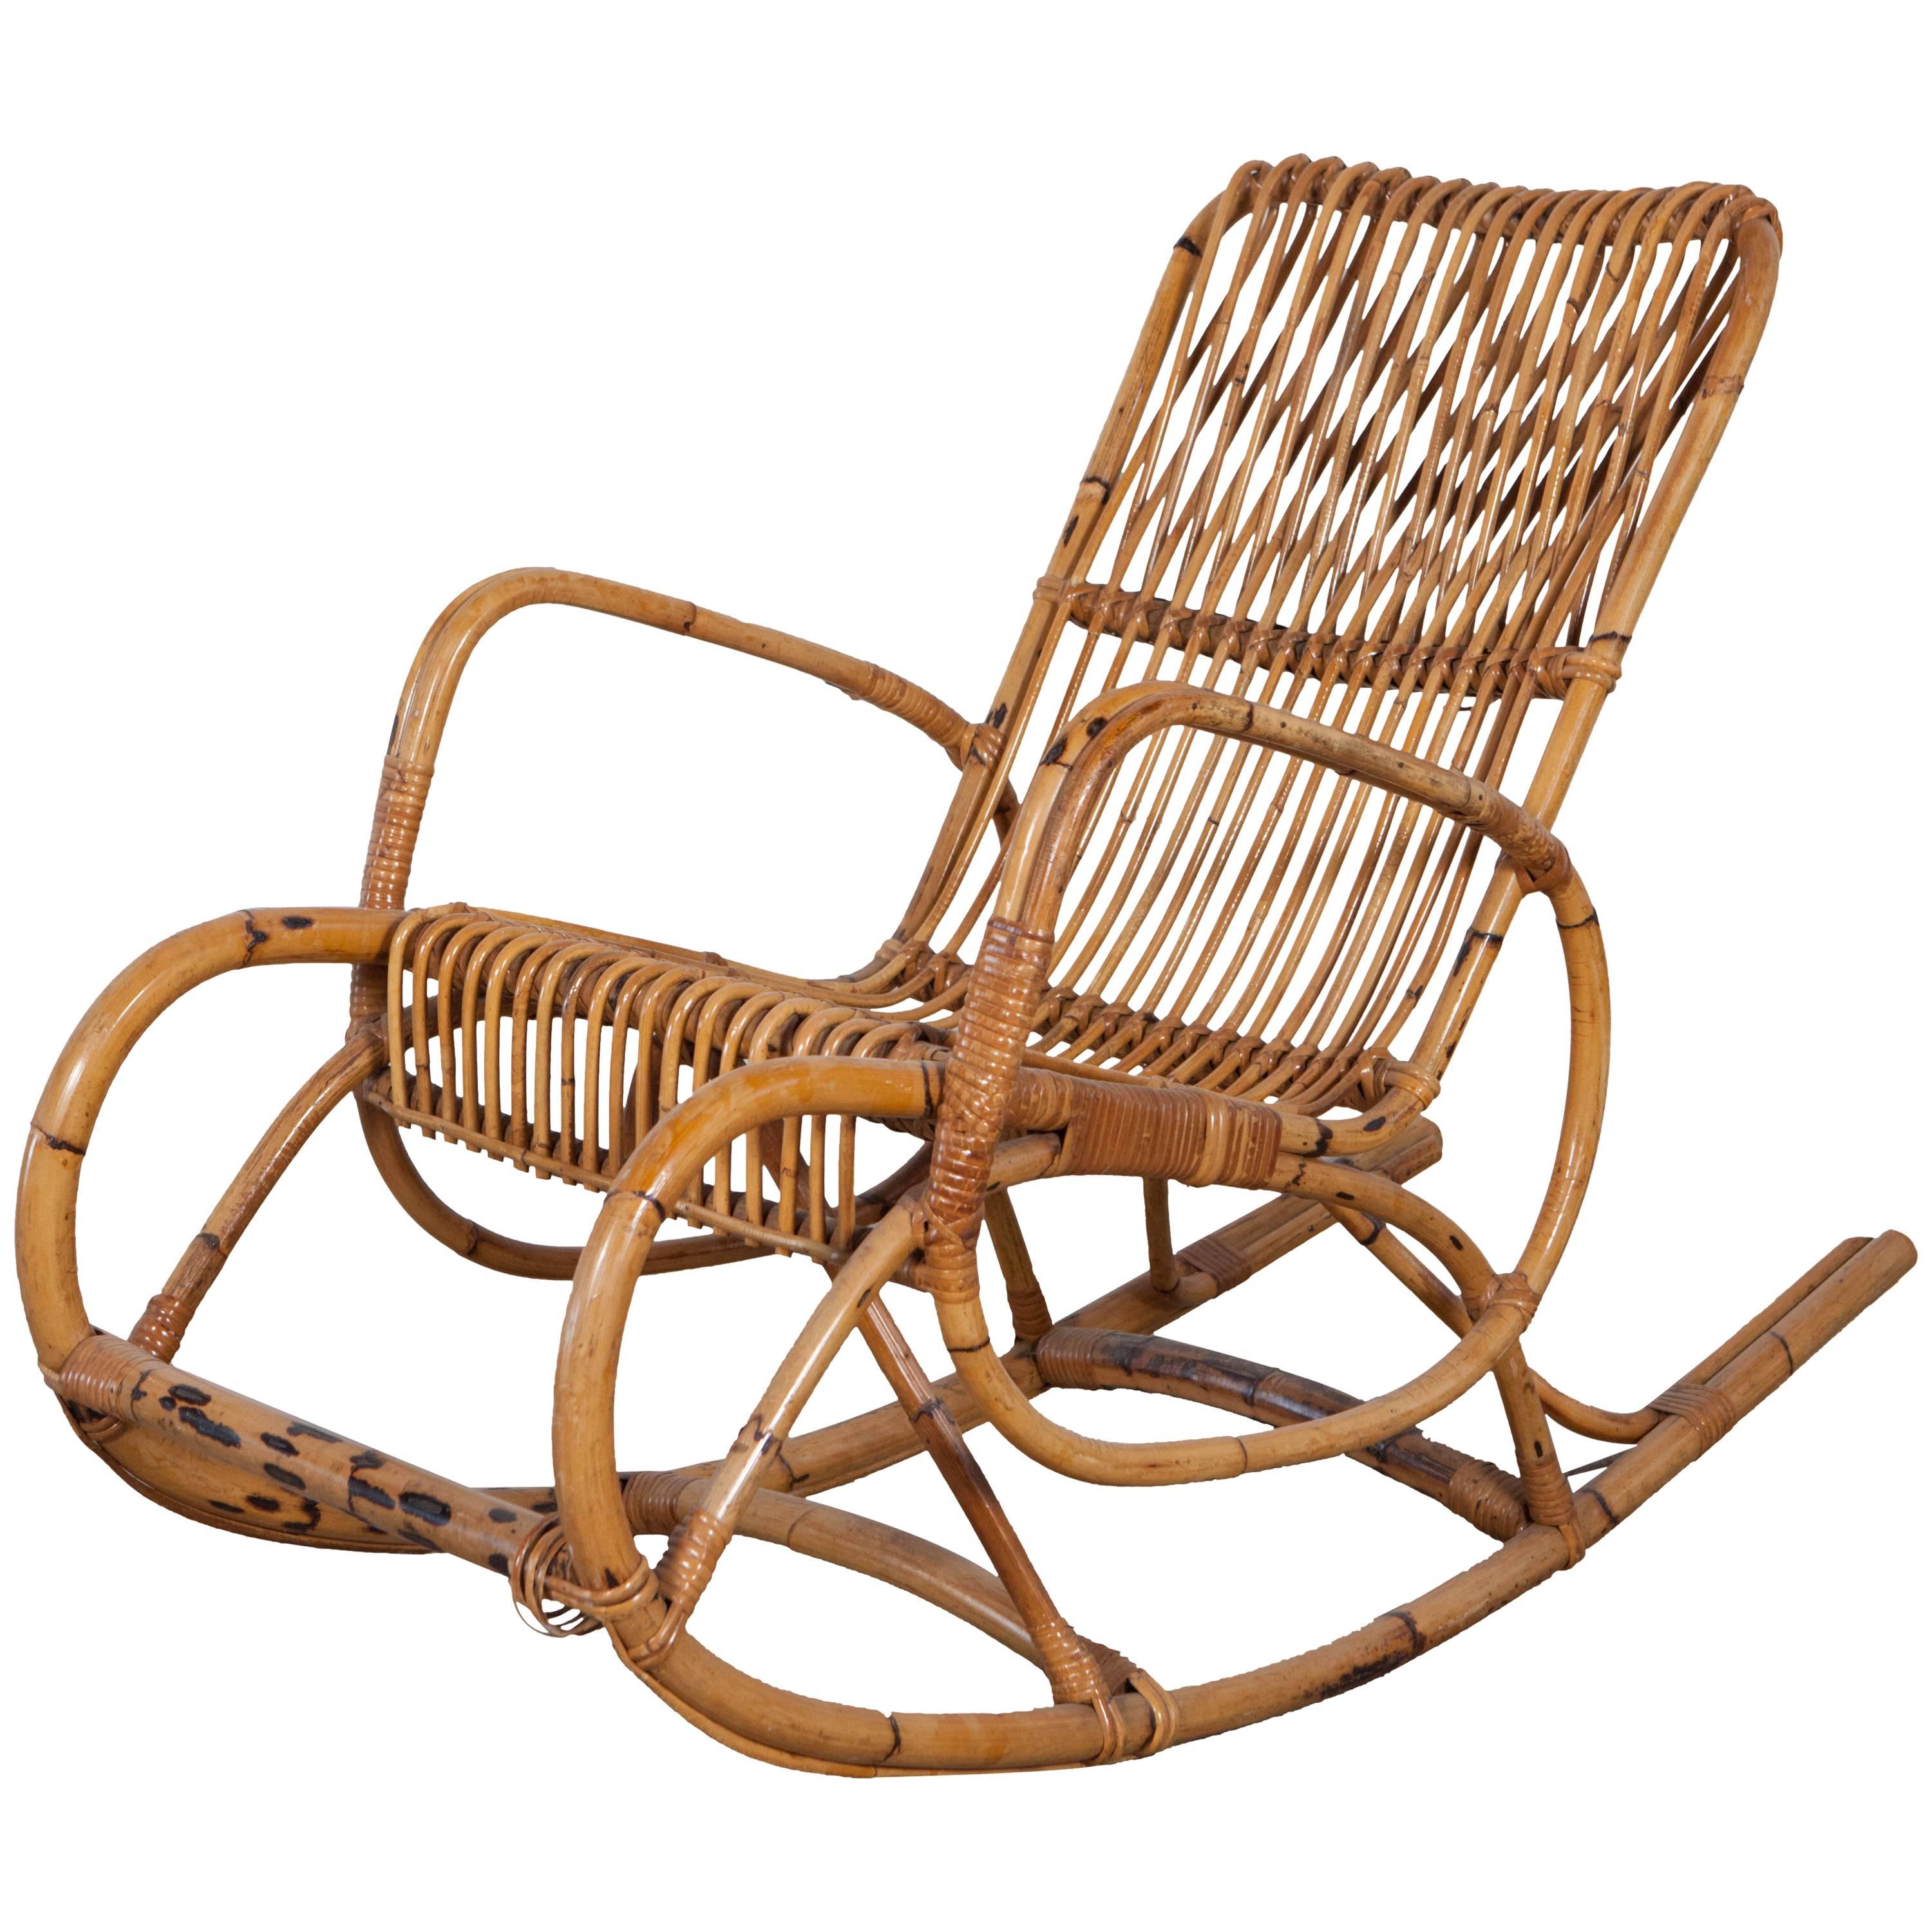 Vintage Italian Bamboo Rocking Chair with Square Arms